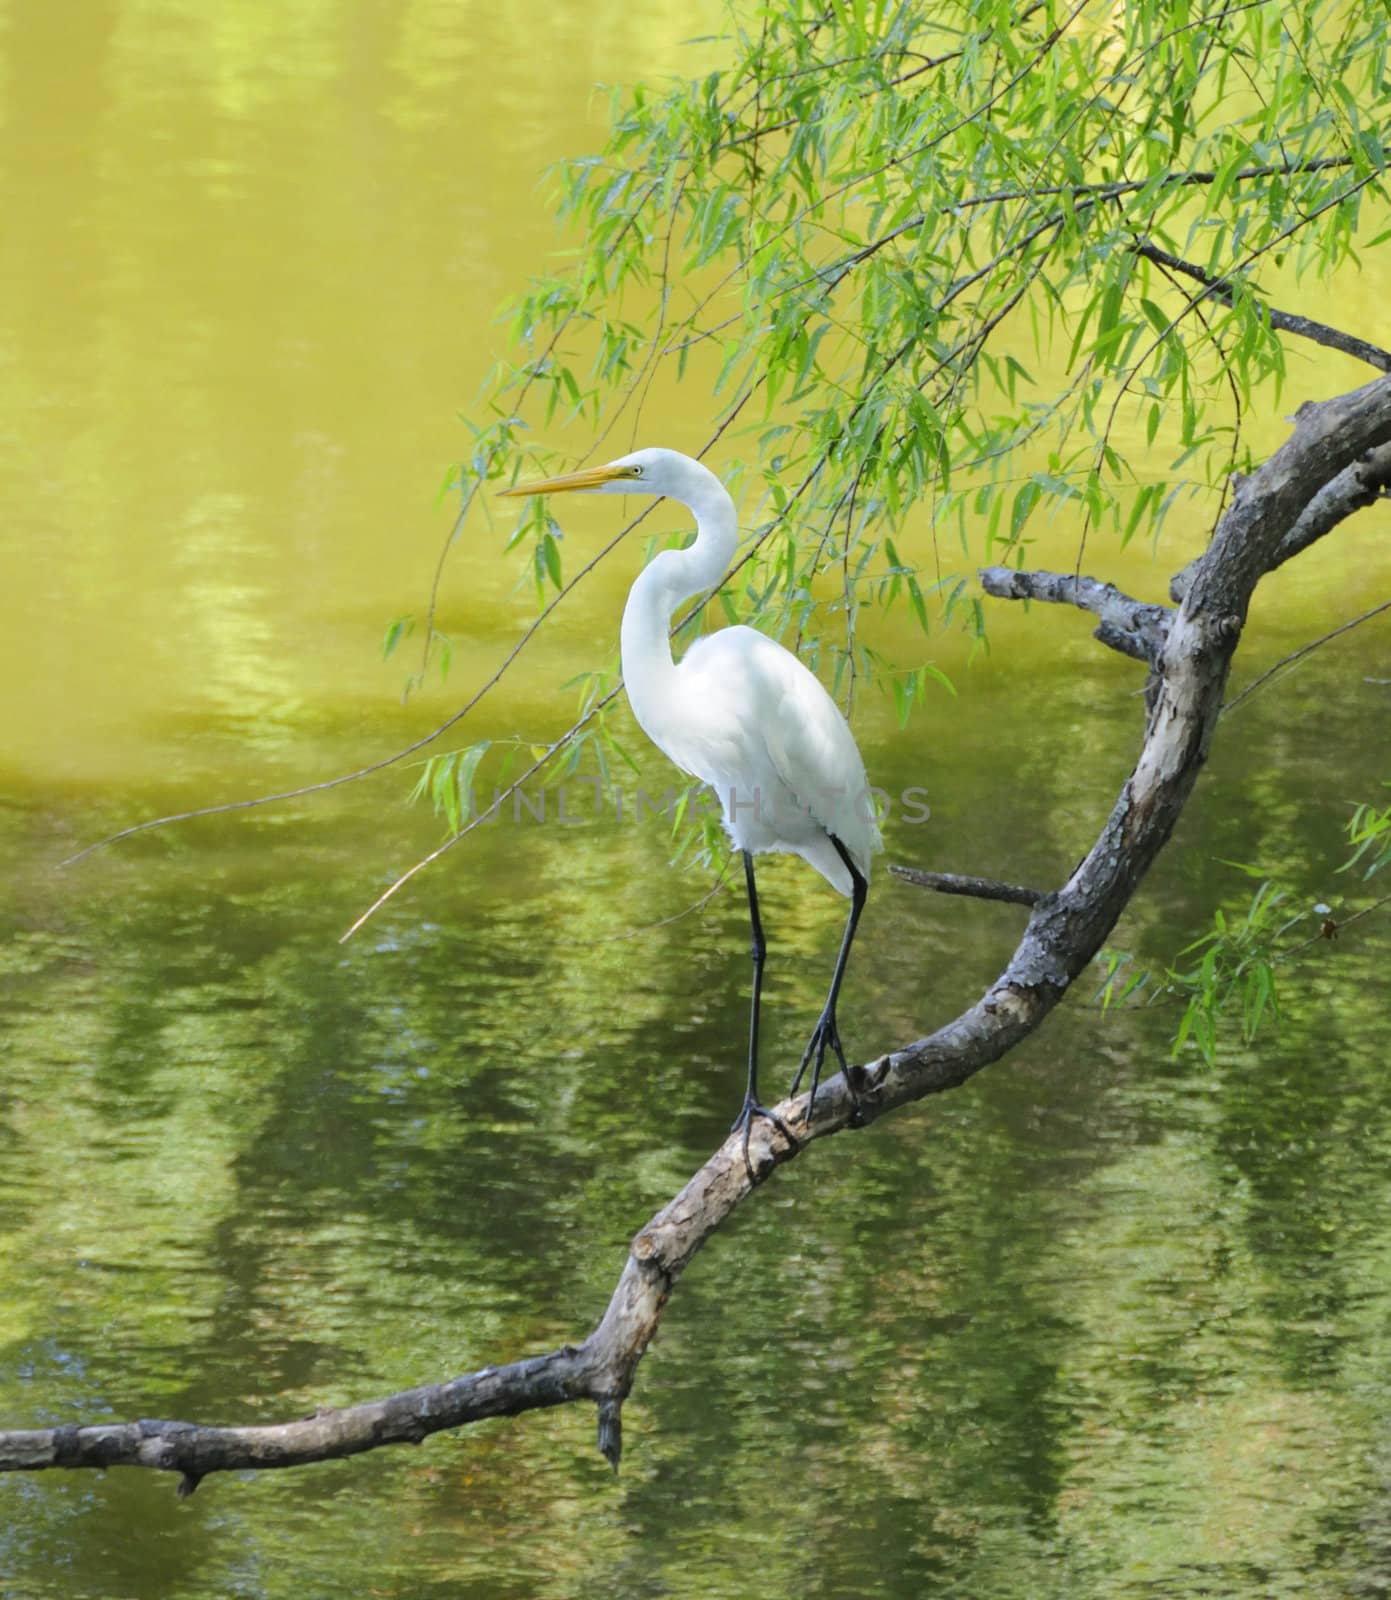 Great Egret Perched on a Limb by wayneandrose